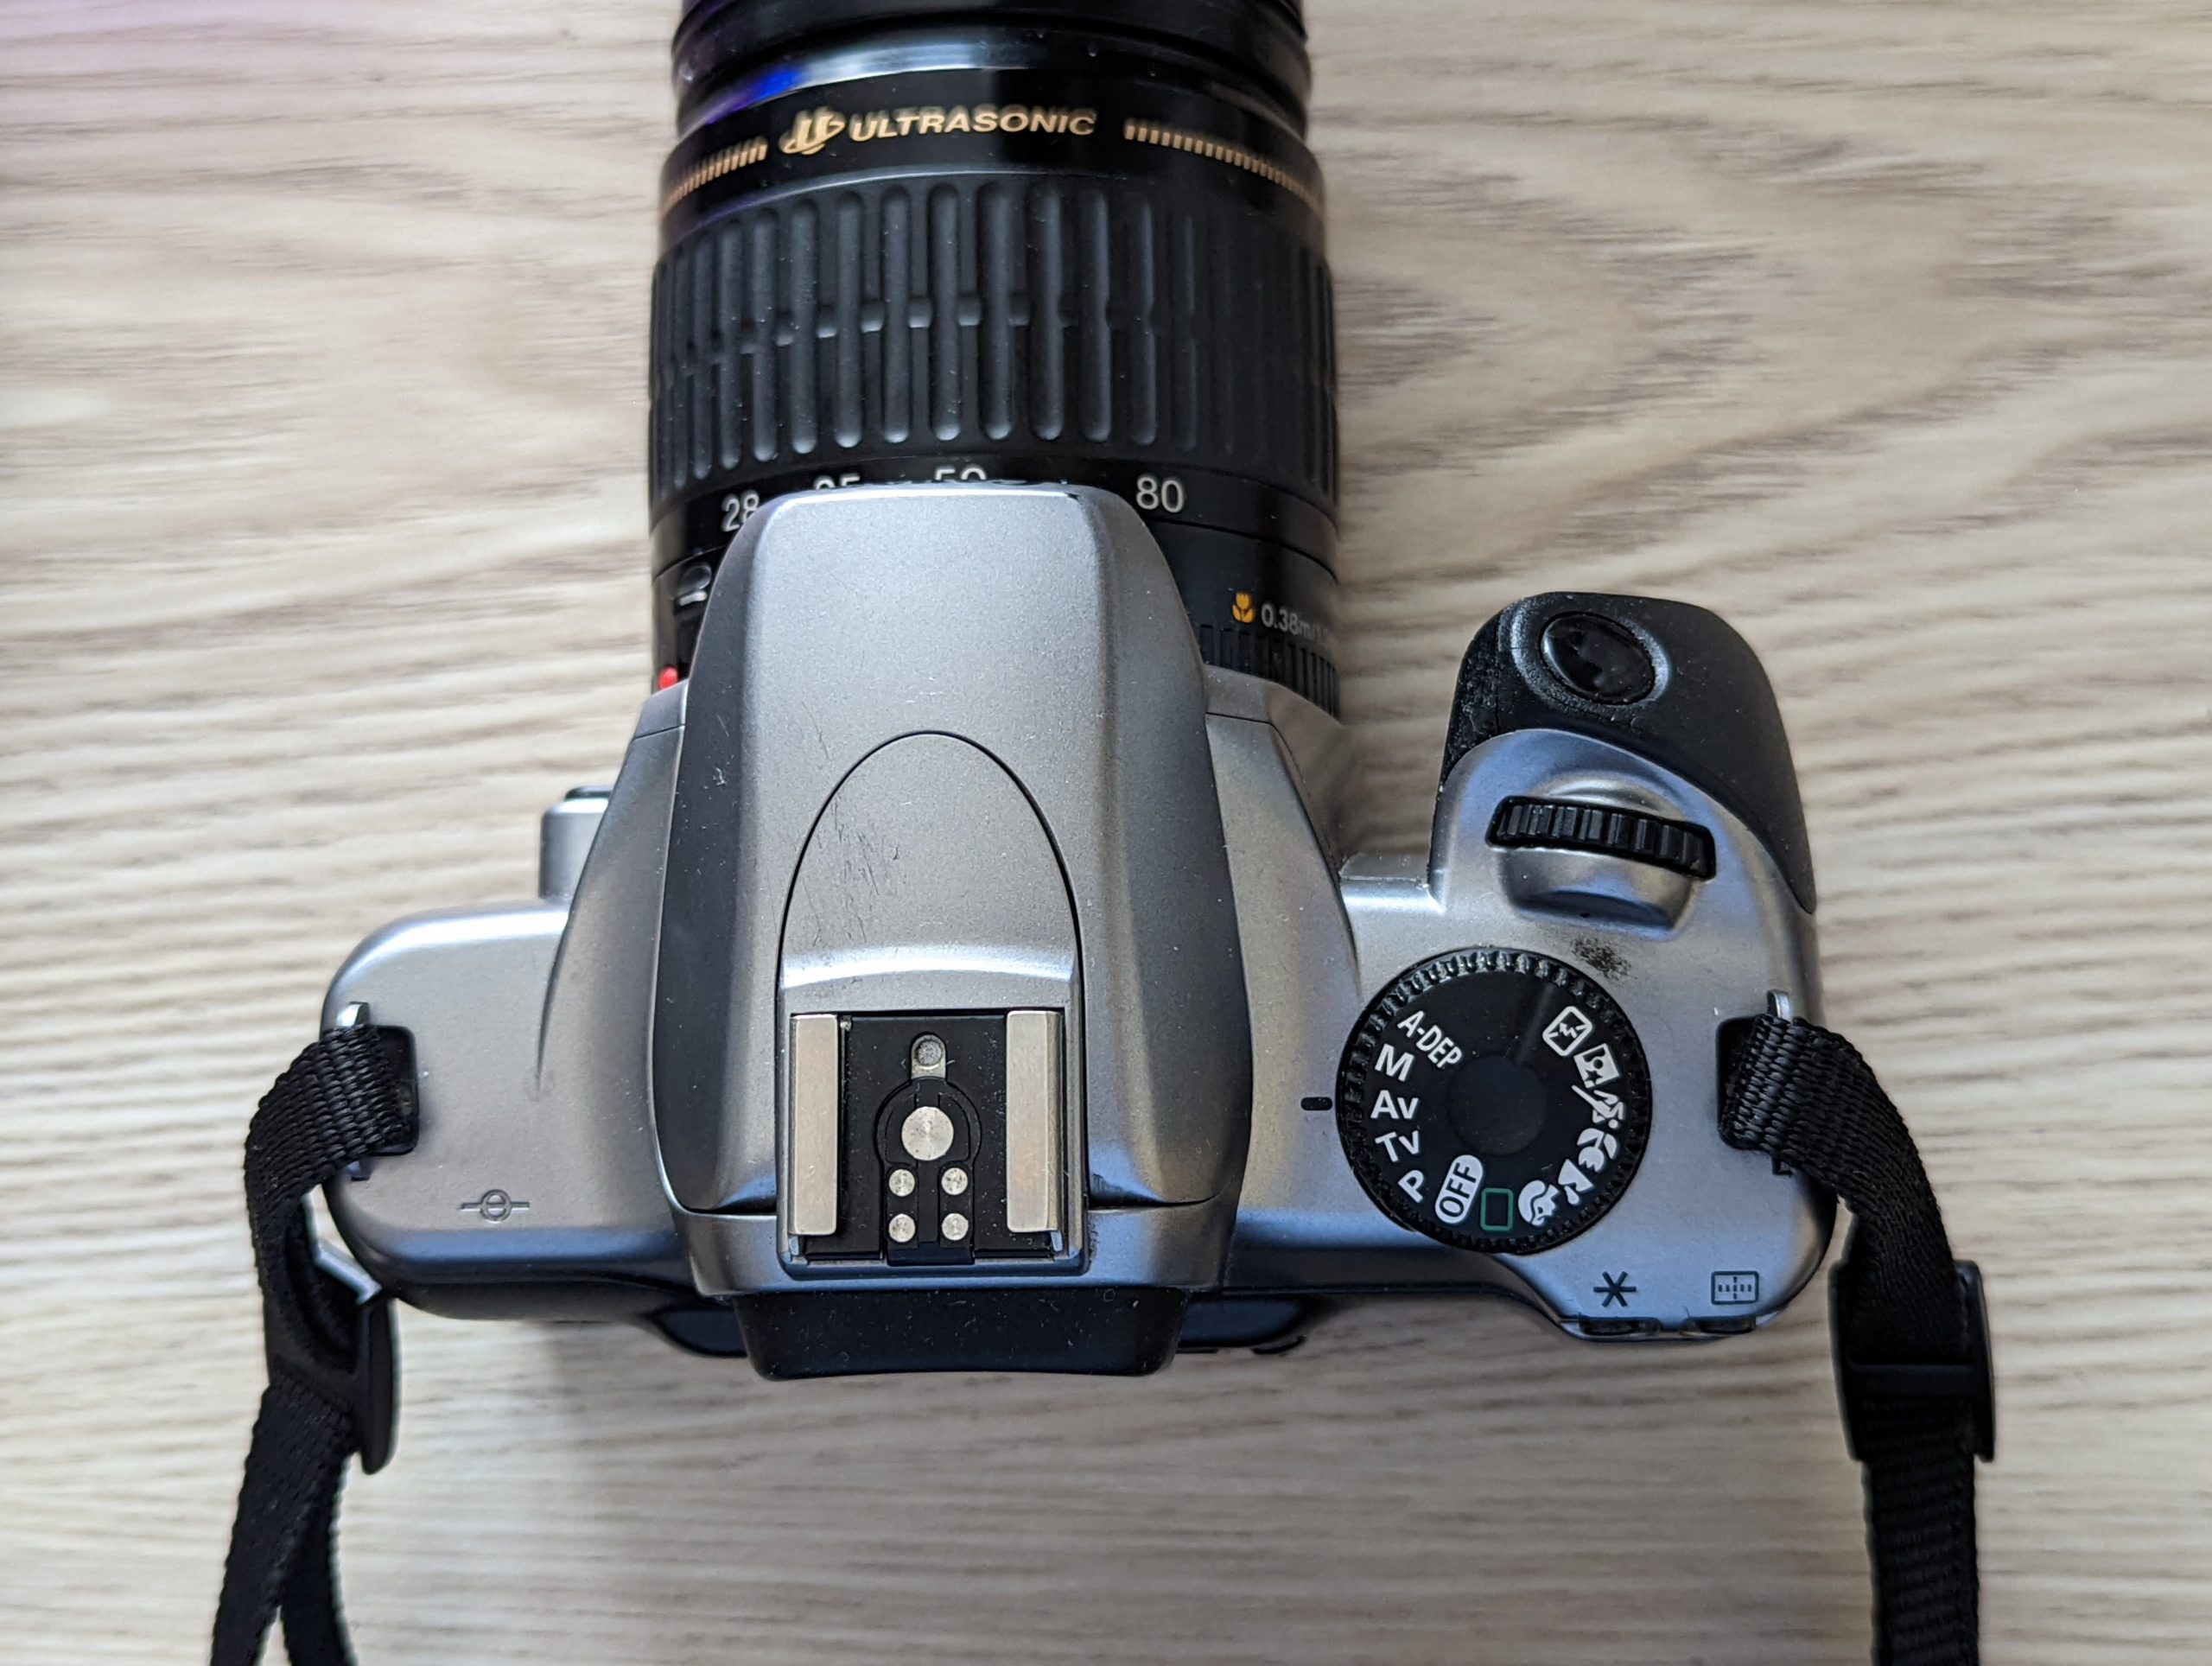 Top plate view of the Canon EOS 3000V